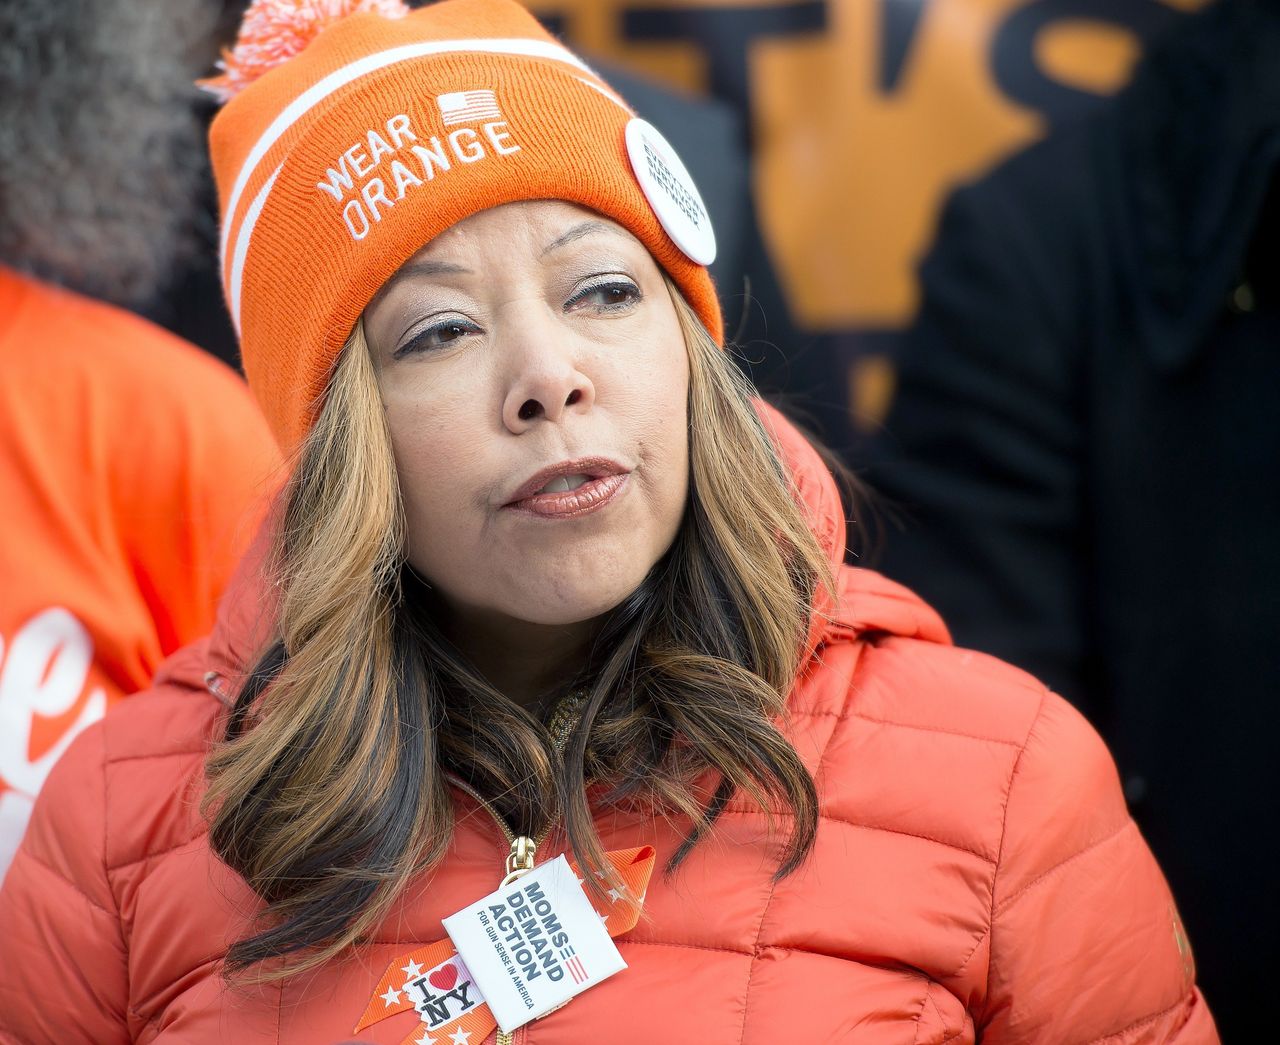 Lucy McBath, at a Peace Week event in New York City in 2016, will have a tough race against Karen Handel, who won the special election in the suburban Atlanta district last year.